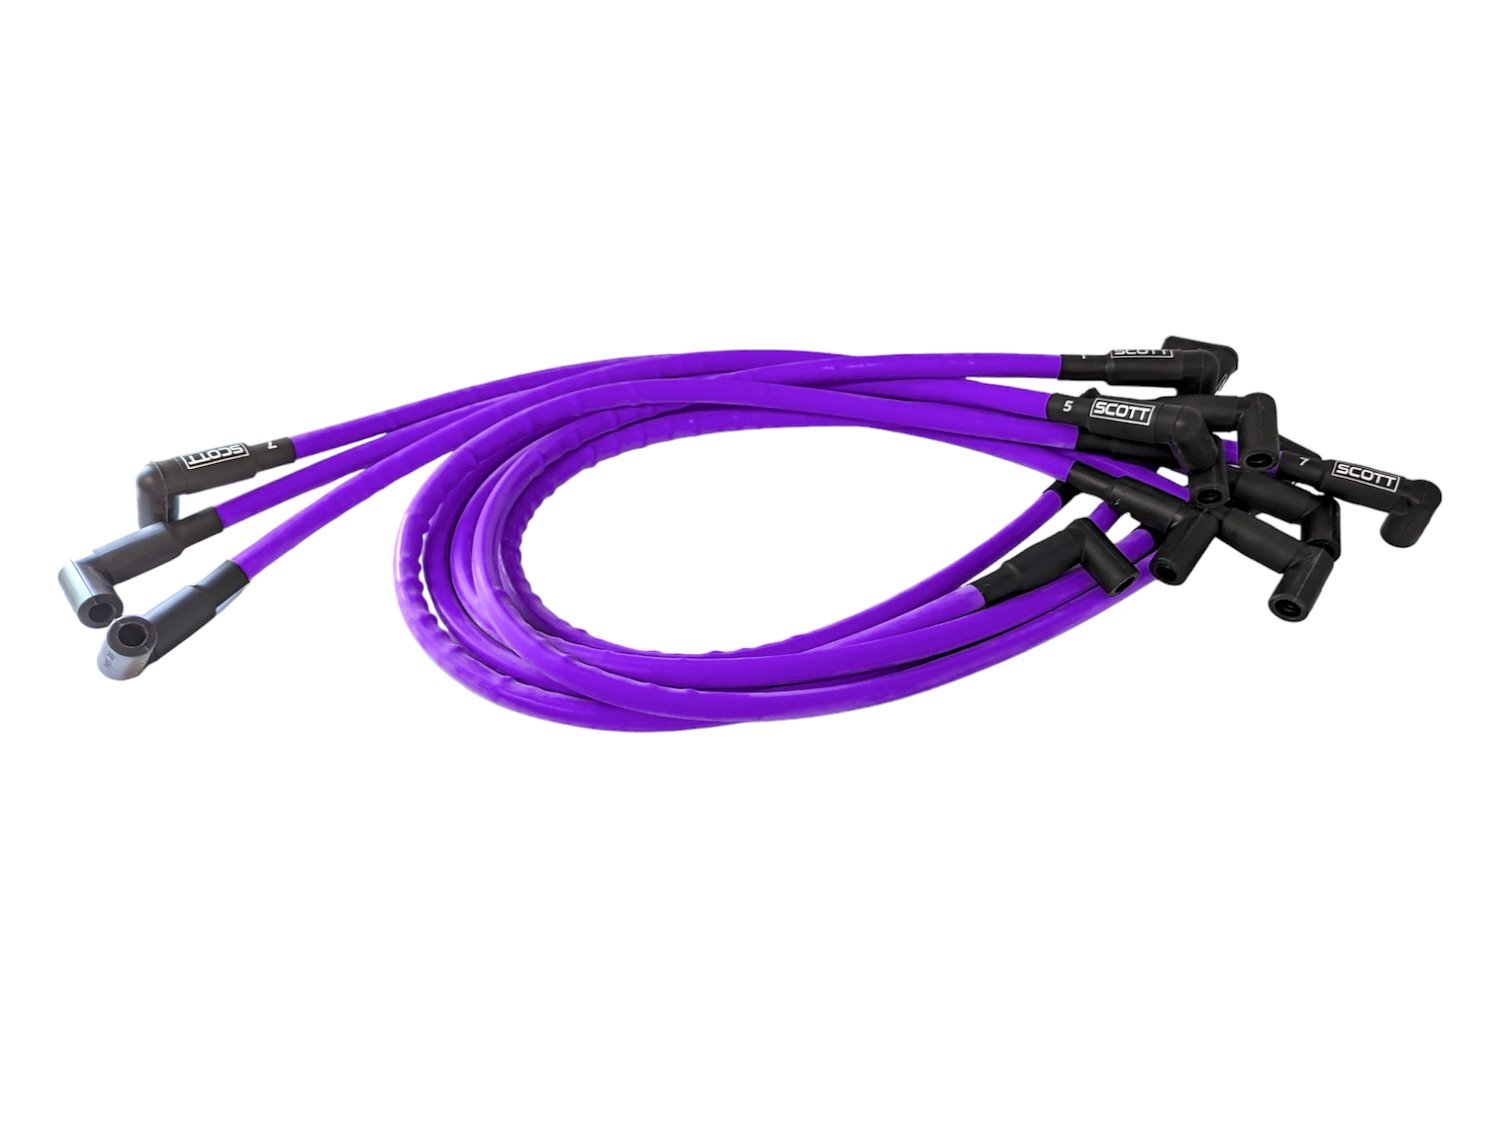 SPW-CH-604-6 High-Performance Silicone-Sleeved Spark Plug Wire Set for Small Block Chevy 604 Crate, Under Header [Purple]